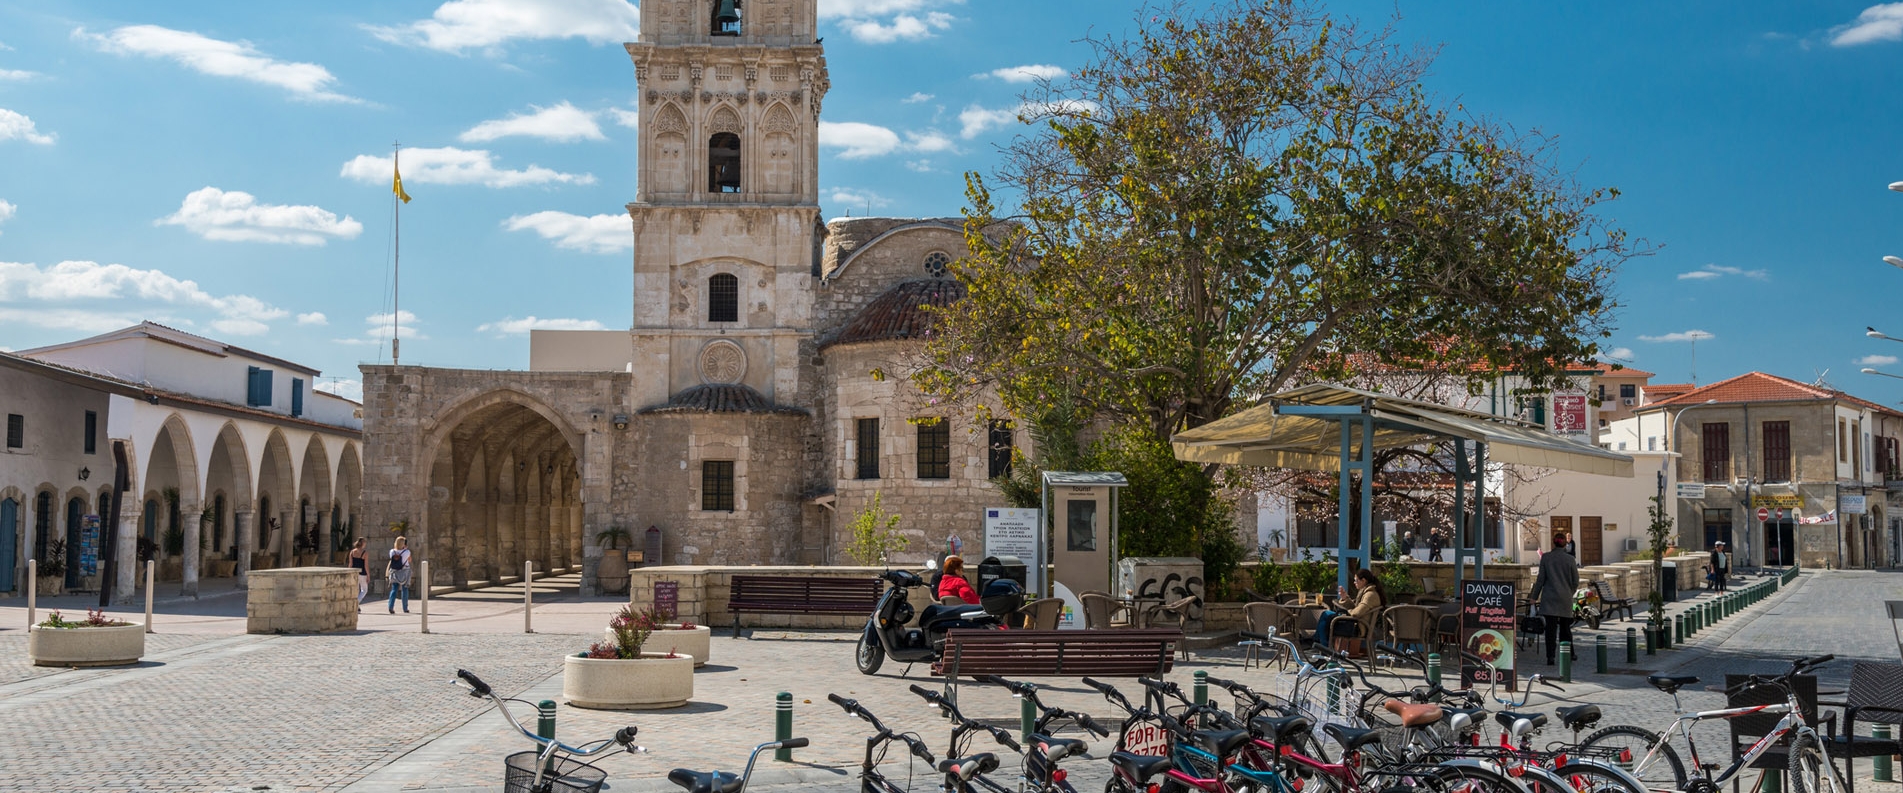 Things to do in Larnaca: Museums, Attractions and Restaurants